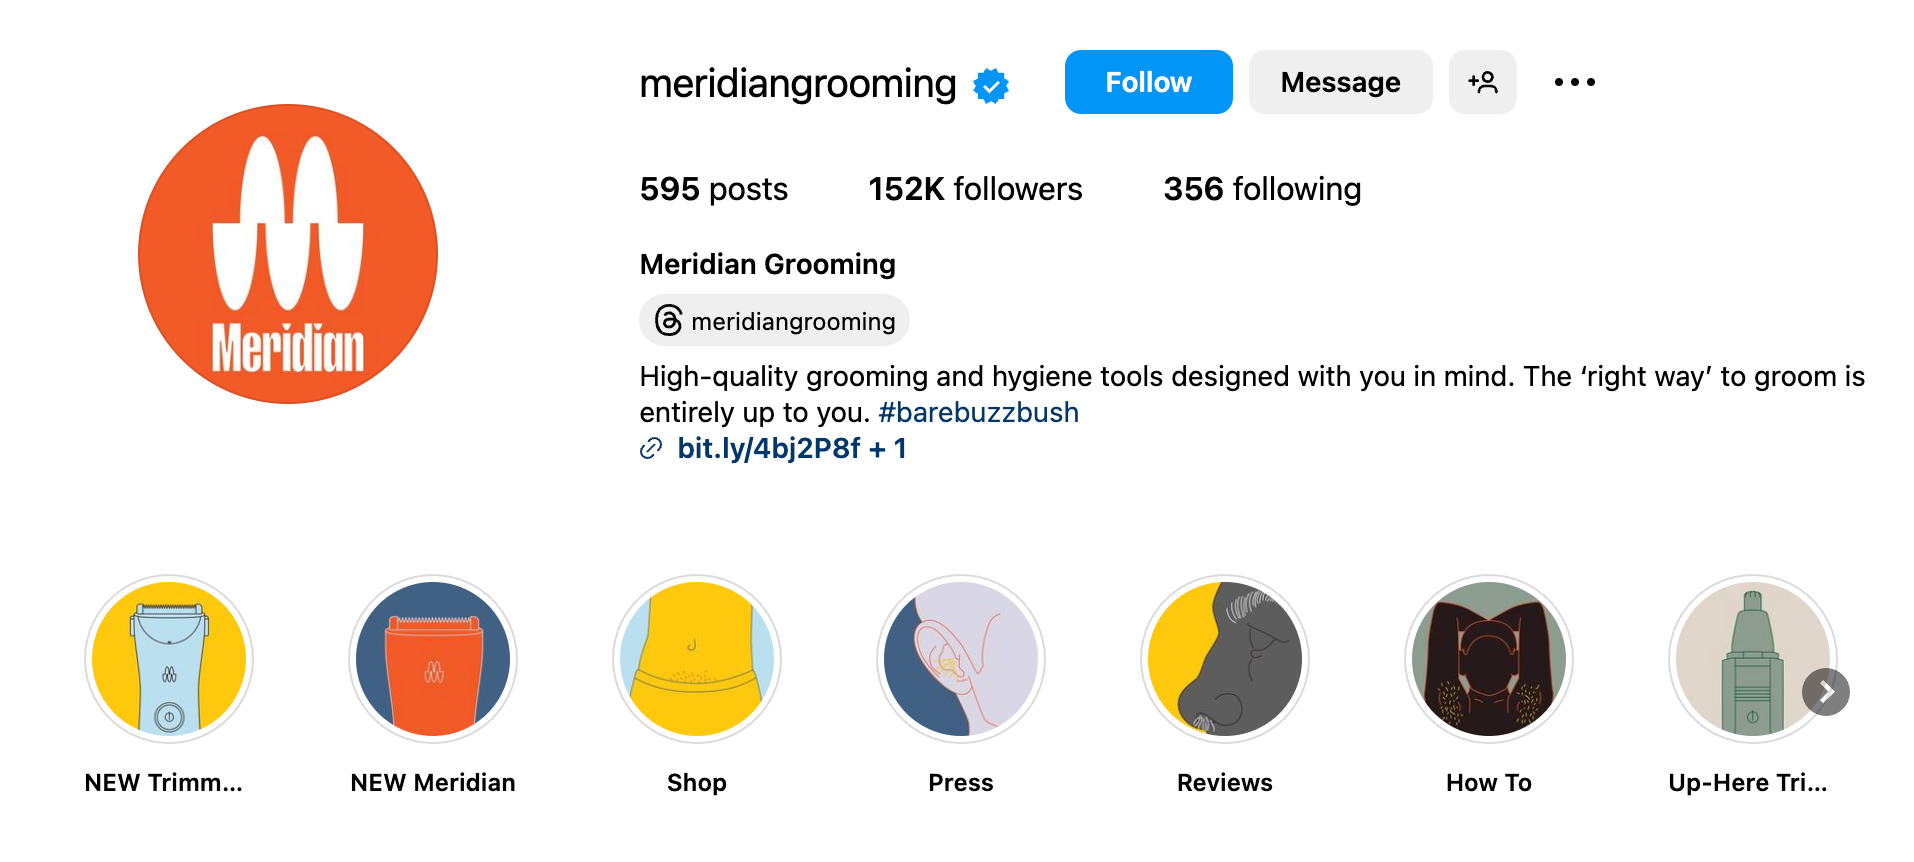 Meridian Grooming’s instagram bio shows a bright orange logo and colorful highlight thumbnails.